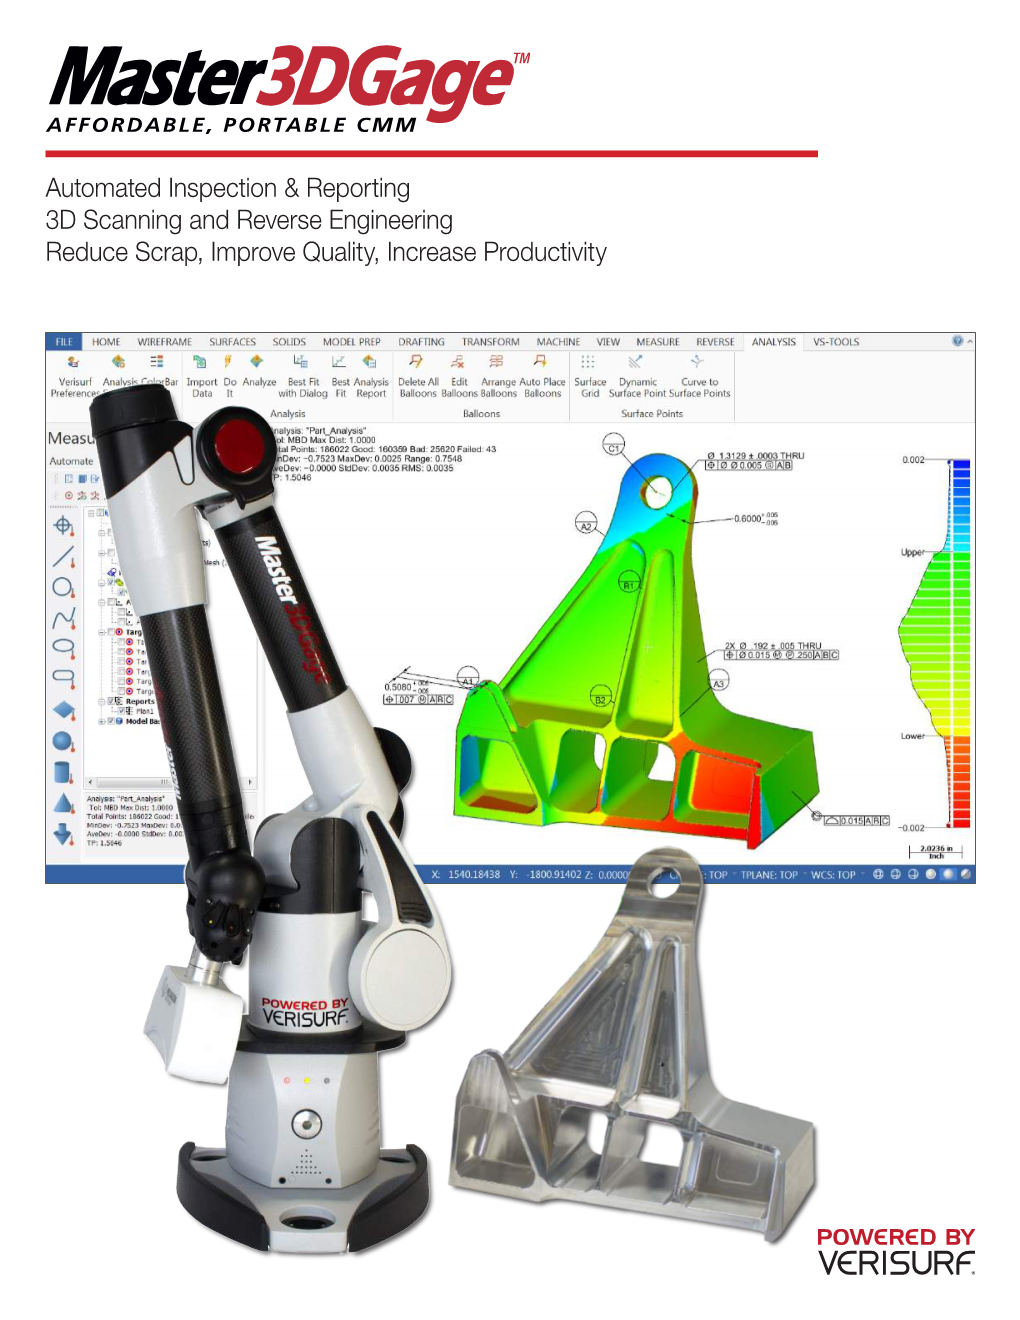 Automated Inspection & Reporting 3D Scanning and Reverse Engineering